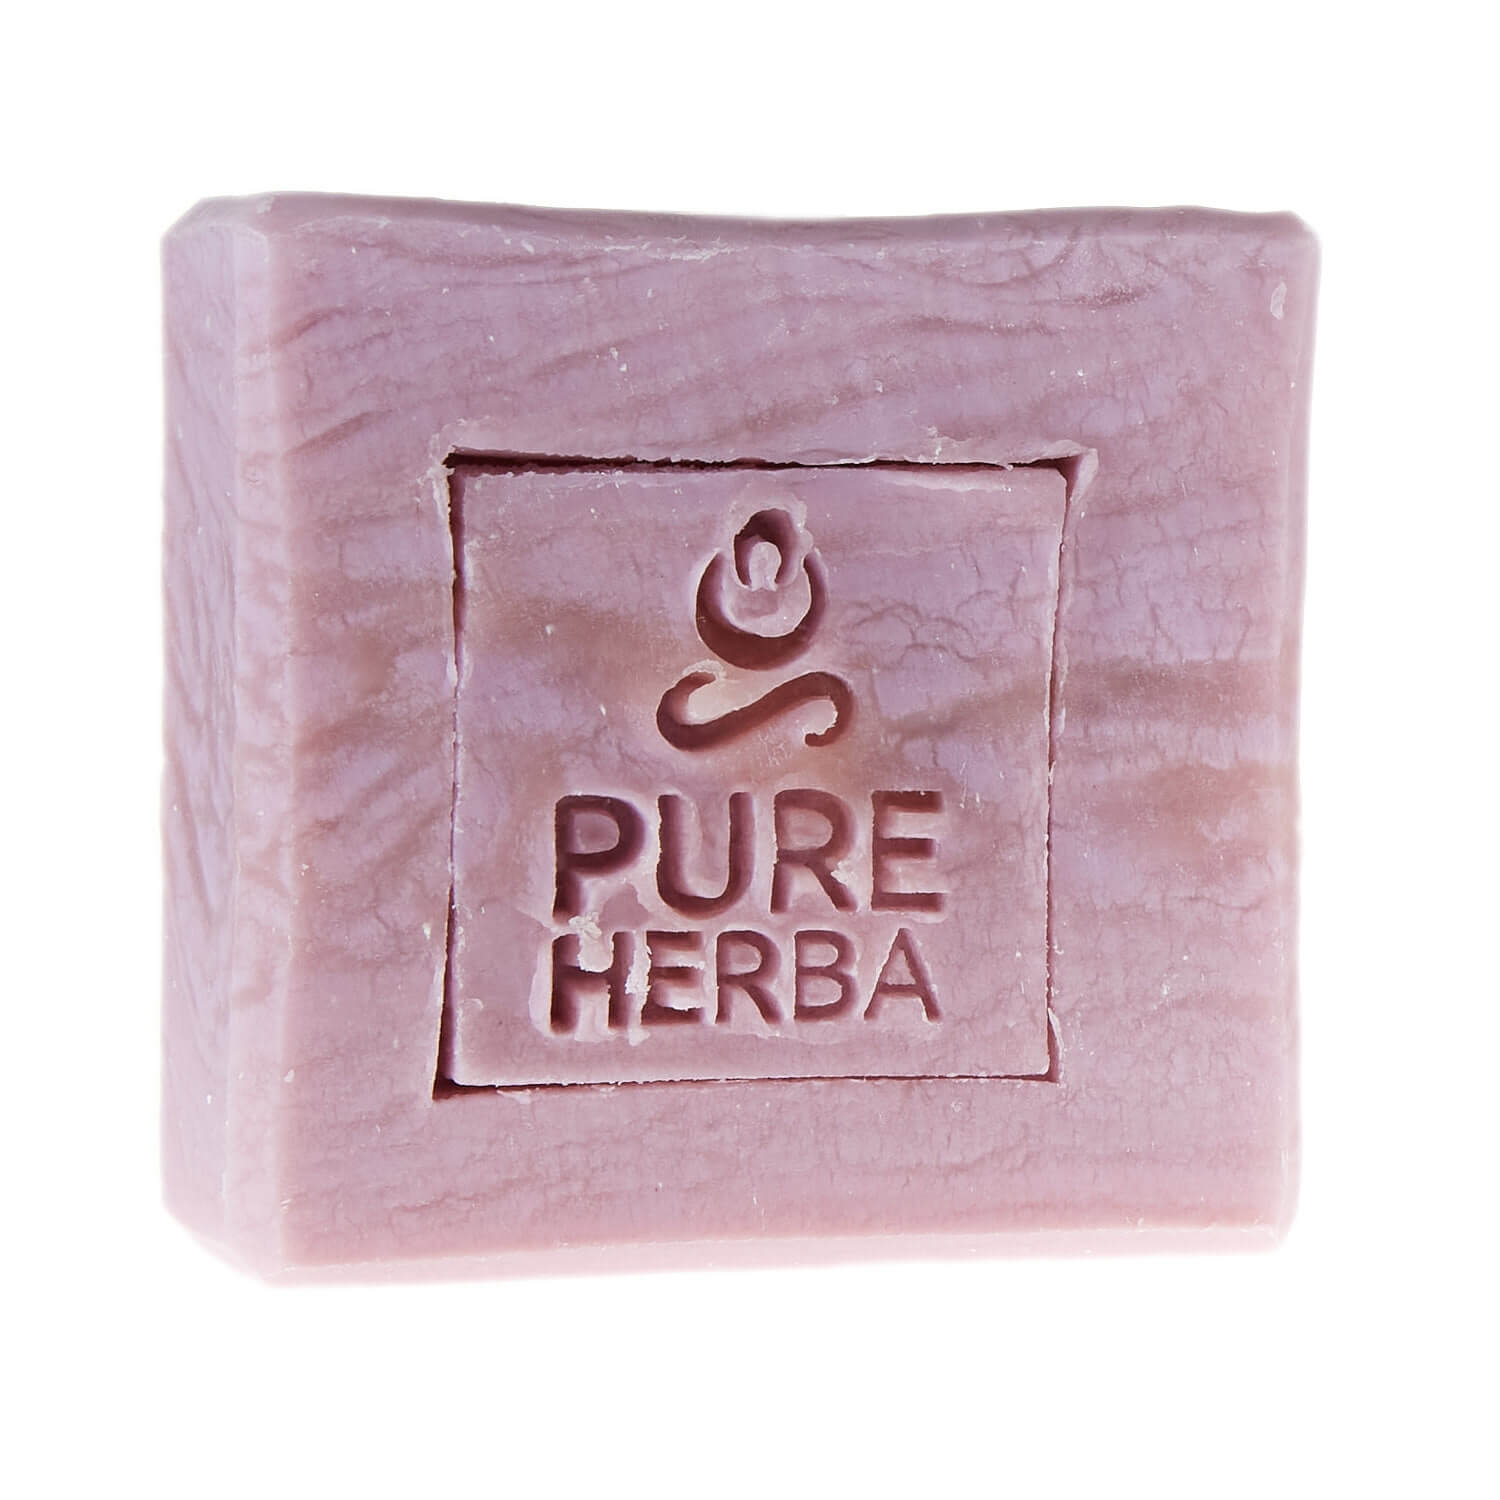 Rose Soap – 100% Natural & Ethical – No Harsh Chemicals – Pure Herba